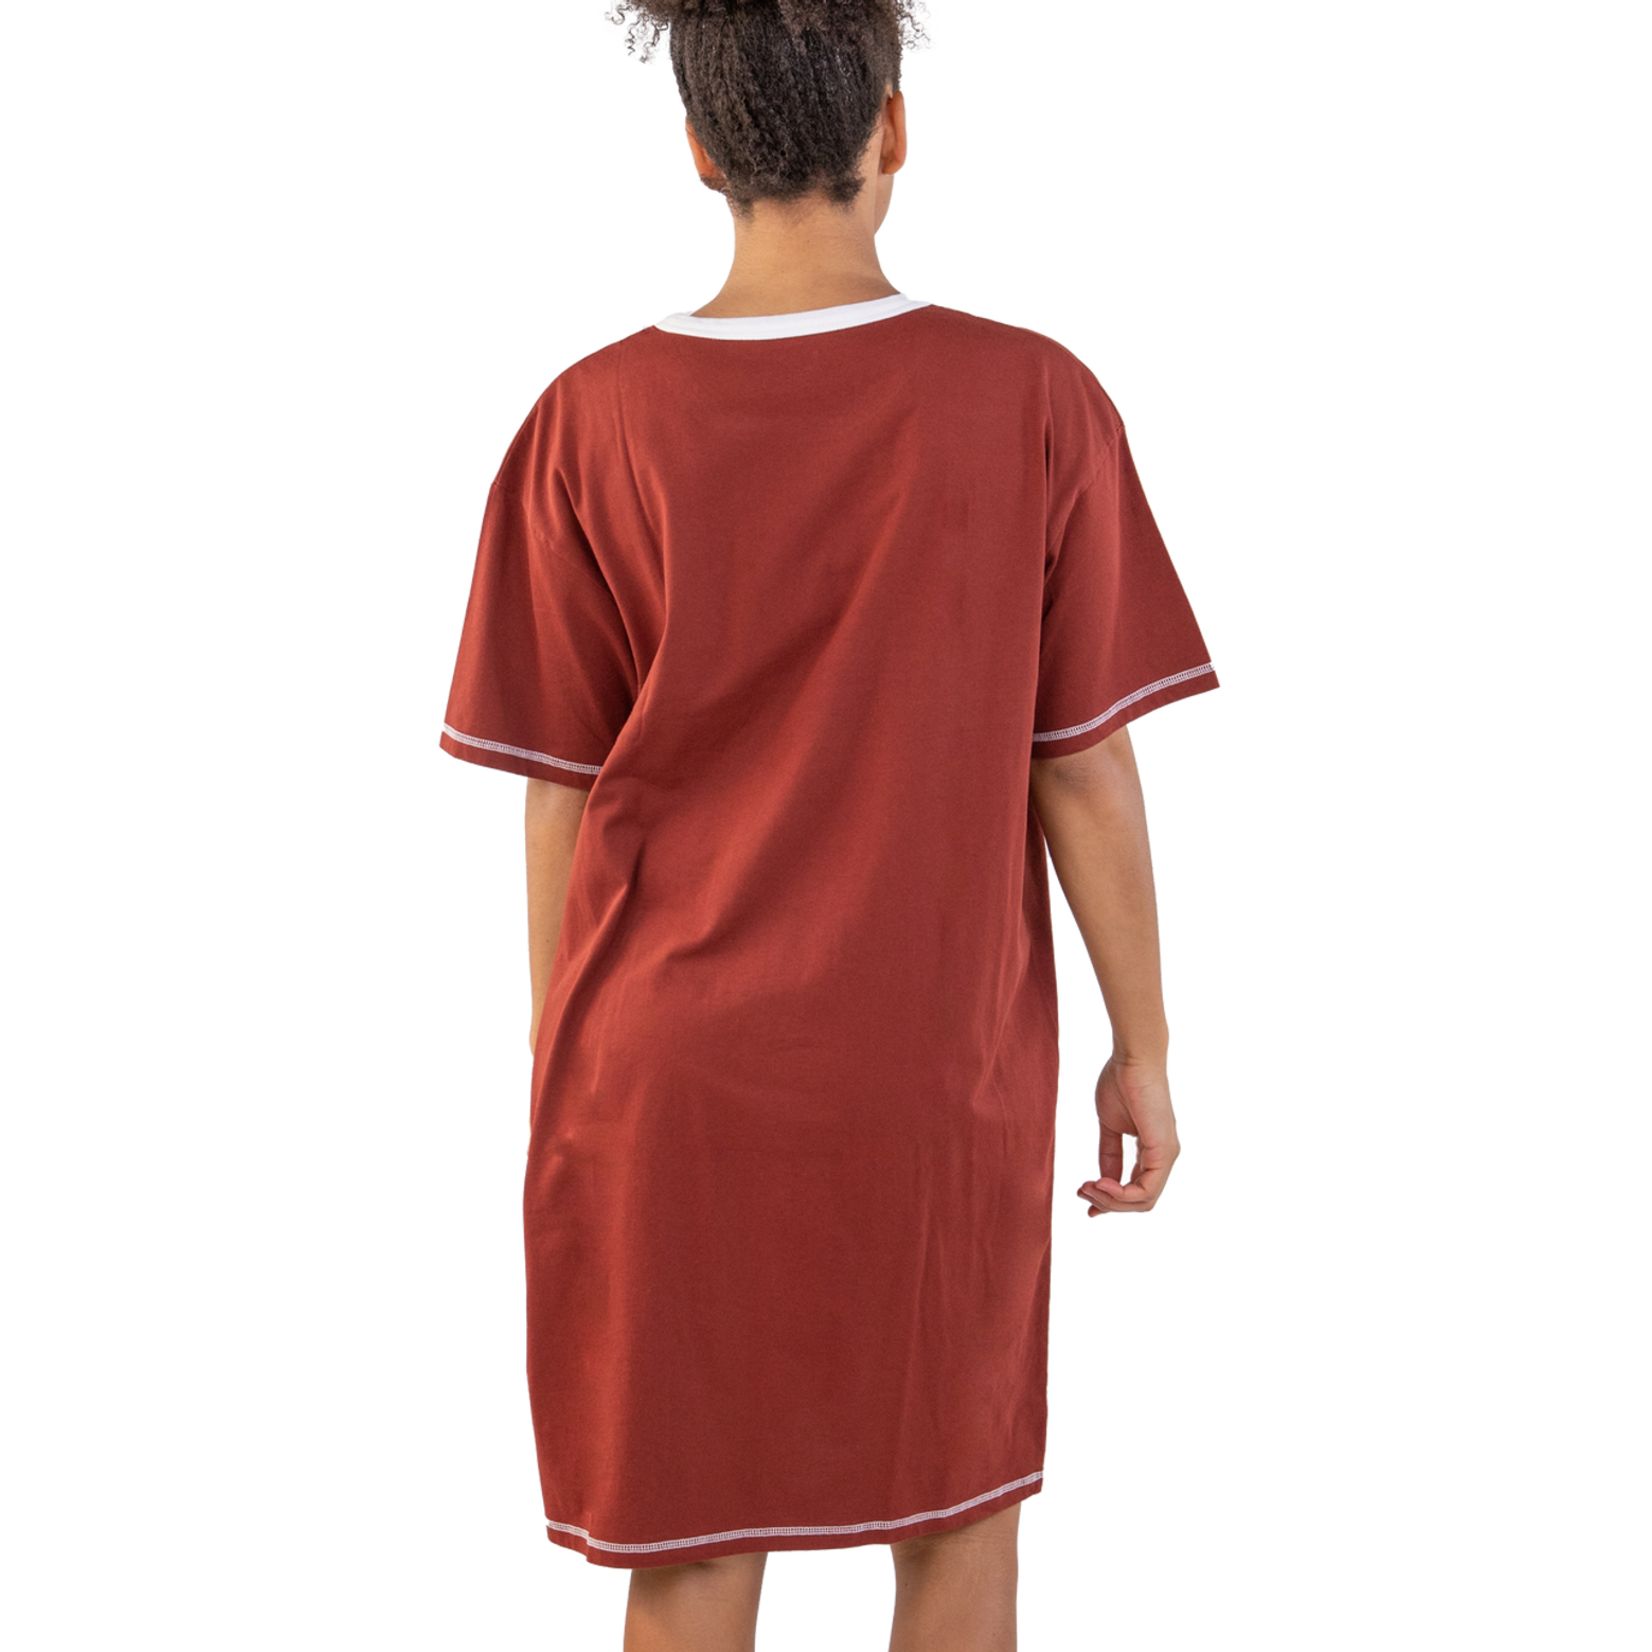 Lazy One Unstable in The Morning Women's Horse Nightshirt